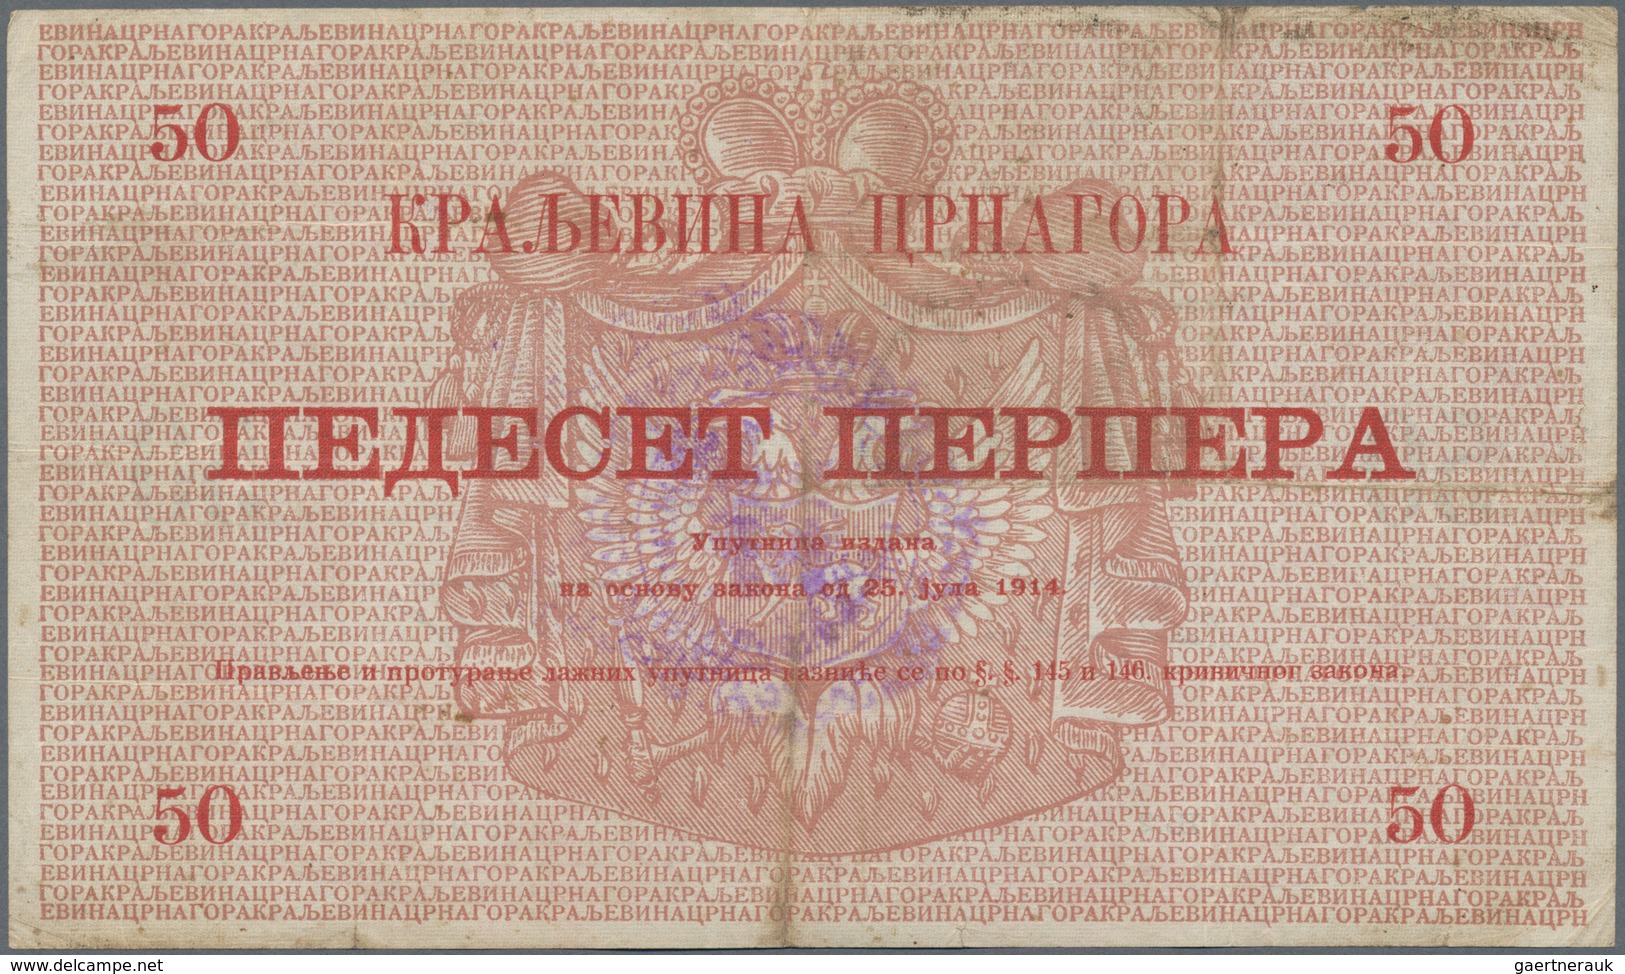 Montenegro: Very interesting lot with 15 banknotes 1 - 100 Perpera 1912-1917, comprising 2, 5, 10 Pe